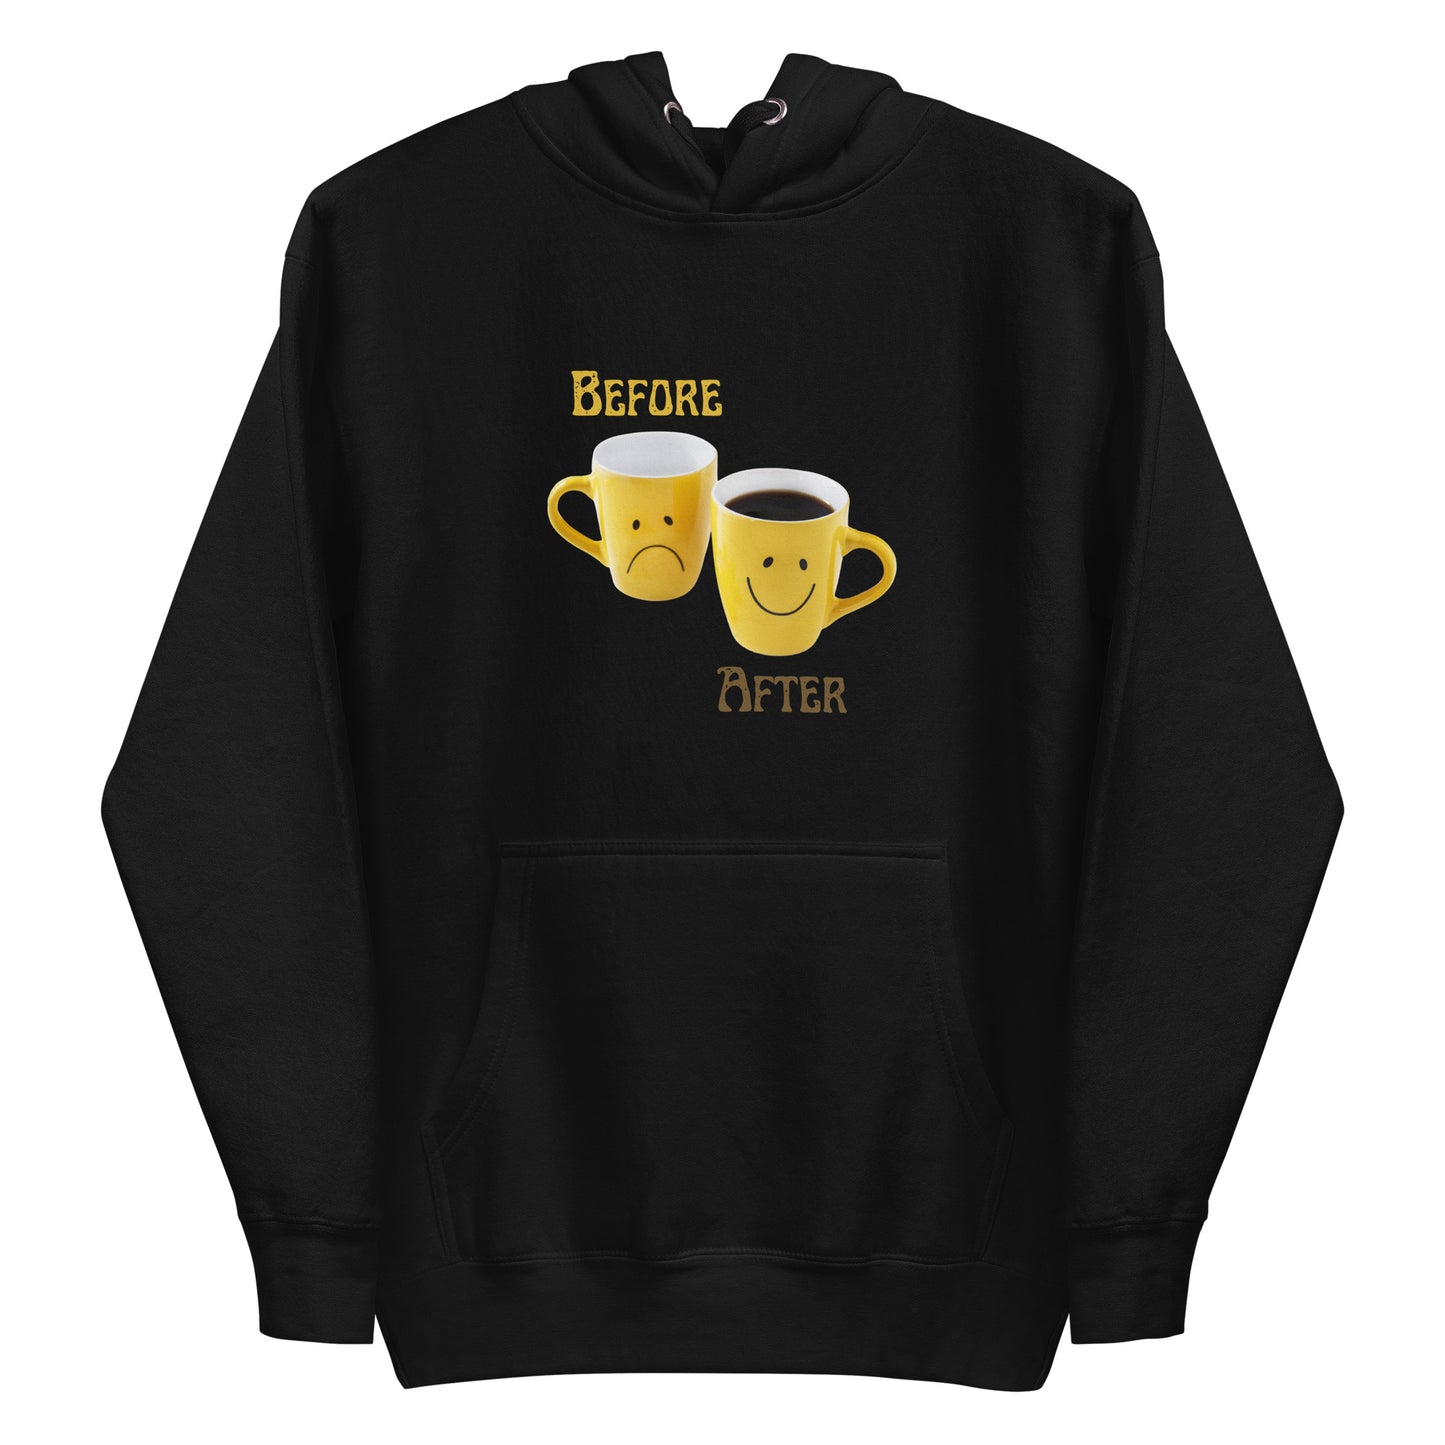 Effects of Coffee Hoodie - Cozy Comfort with a Caffeine Twist!